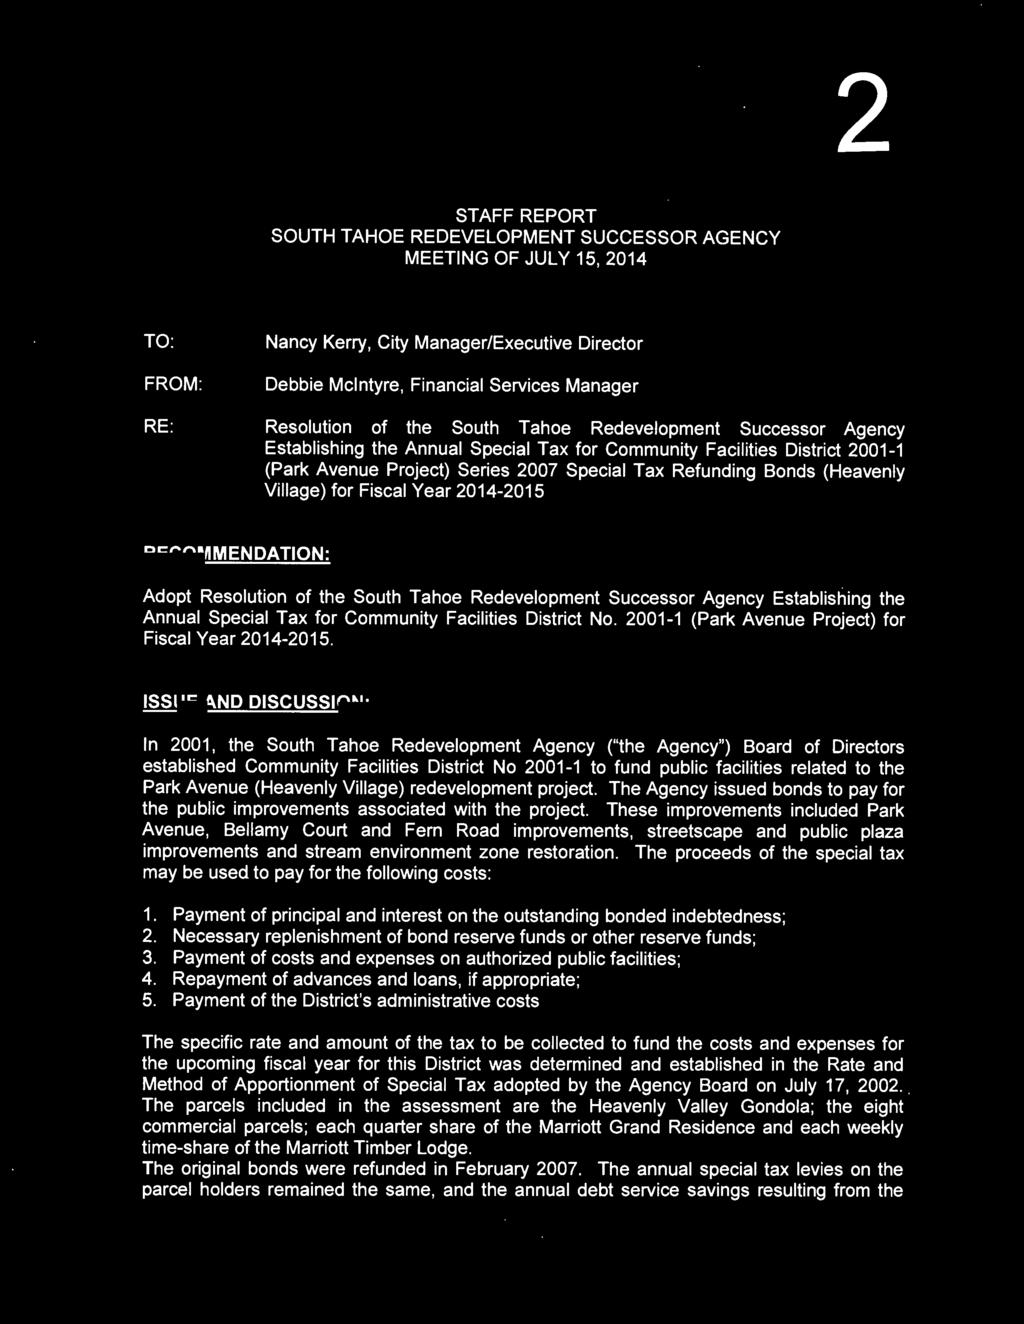 2007 Special Tax Refunding Bonds (Heavenly Village) for Fiscal Year 2014-2015 RECOMMENDATION: Adopt Resolution of the South Tahoe Redevelopment Successor Agency Establishing the Annual Special Tax